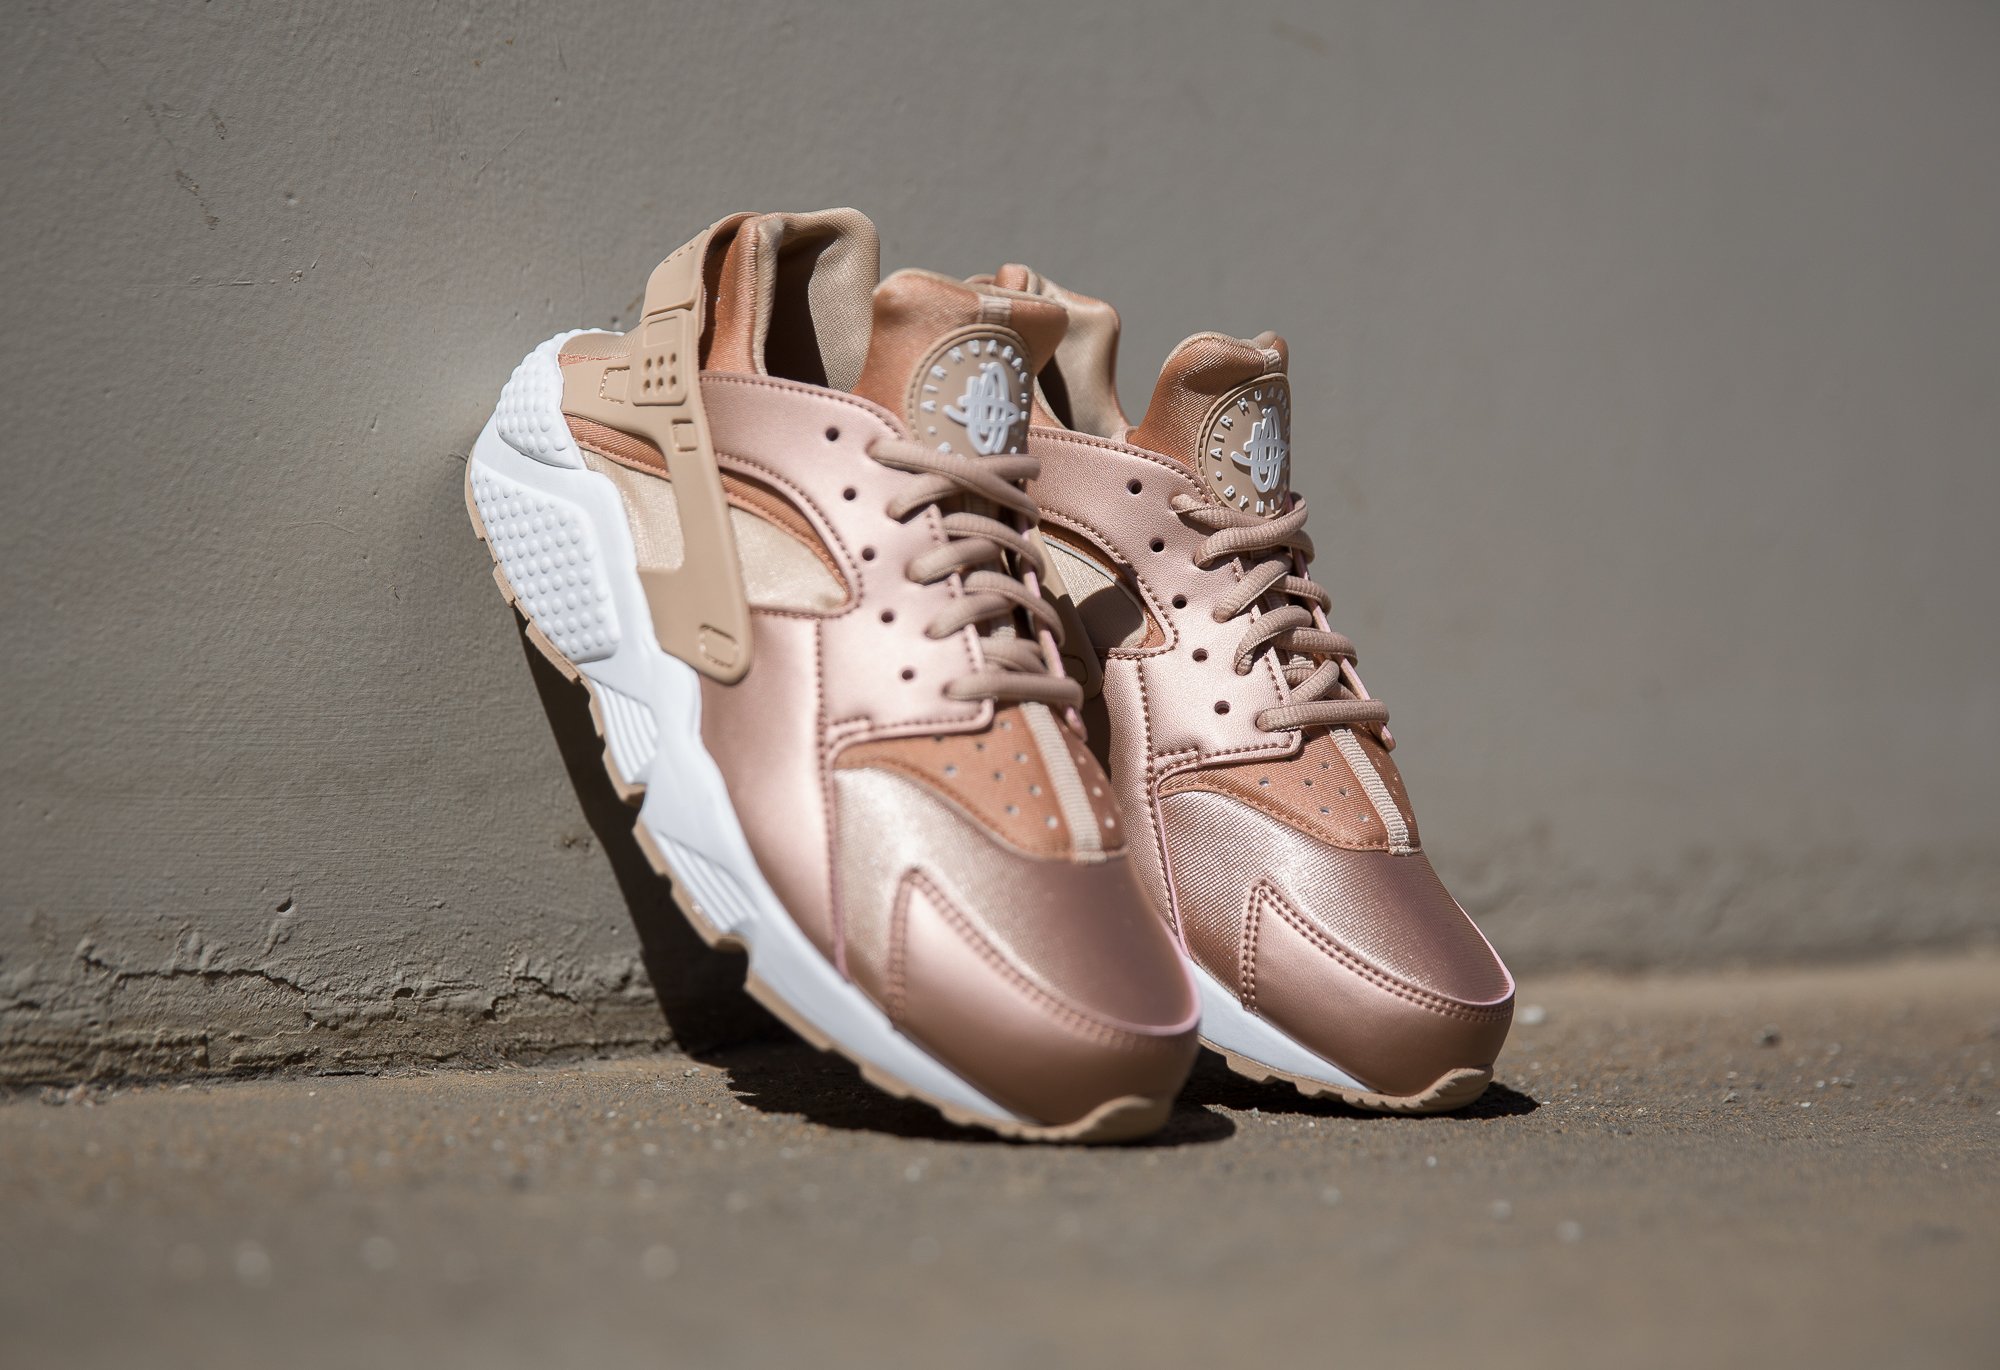 Shiekh.com on Twitter: "This #Nike Women's Air Huarache in Metallic Red Bronze is launching 10/14. Any ladies feeling these? #WeAreWhatsNext / Twitter